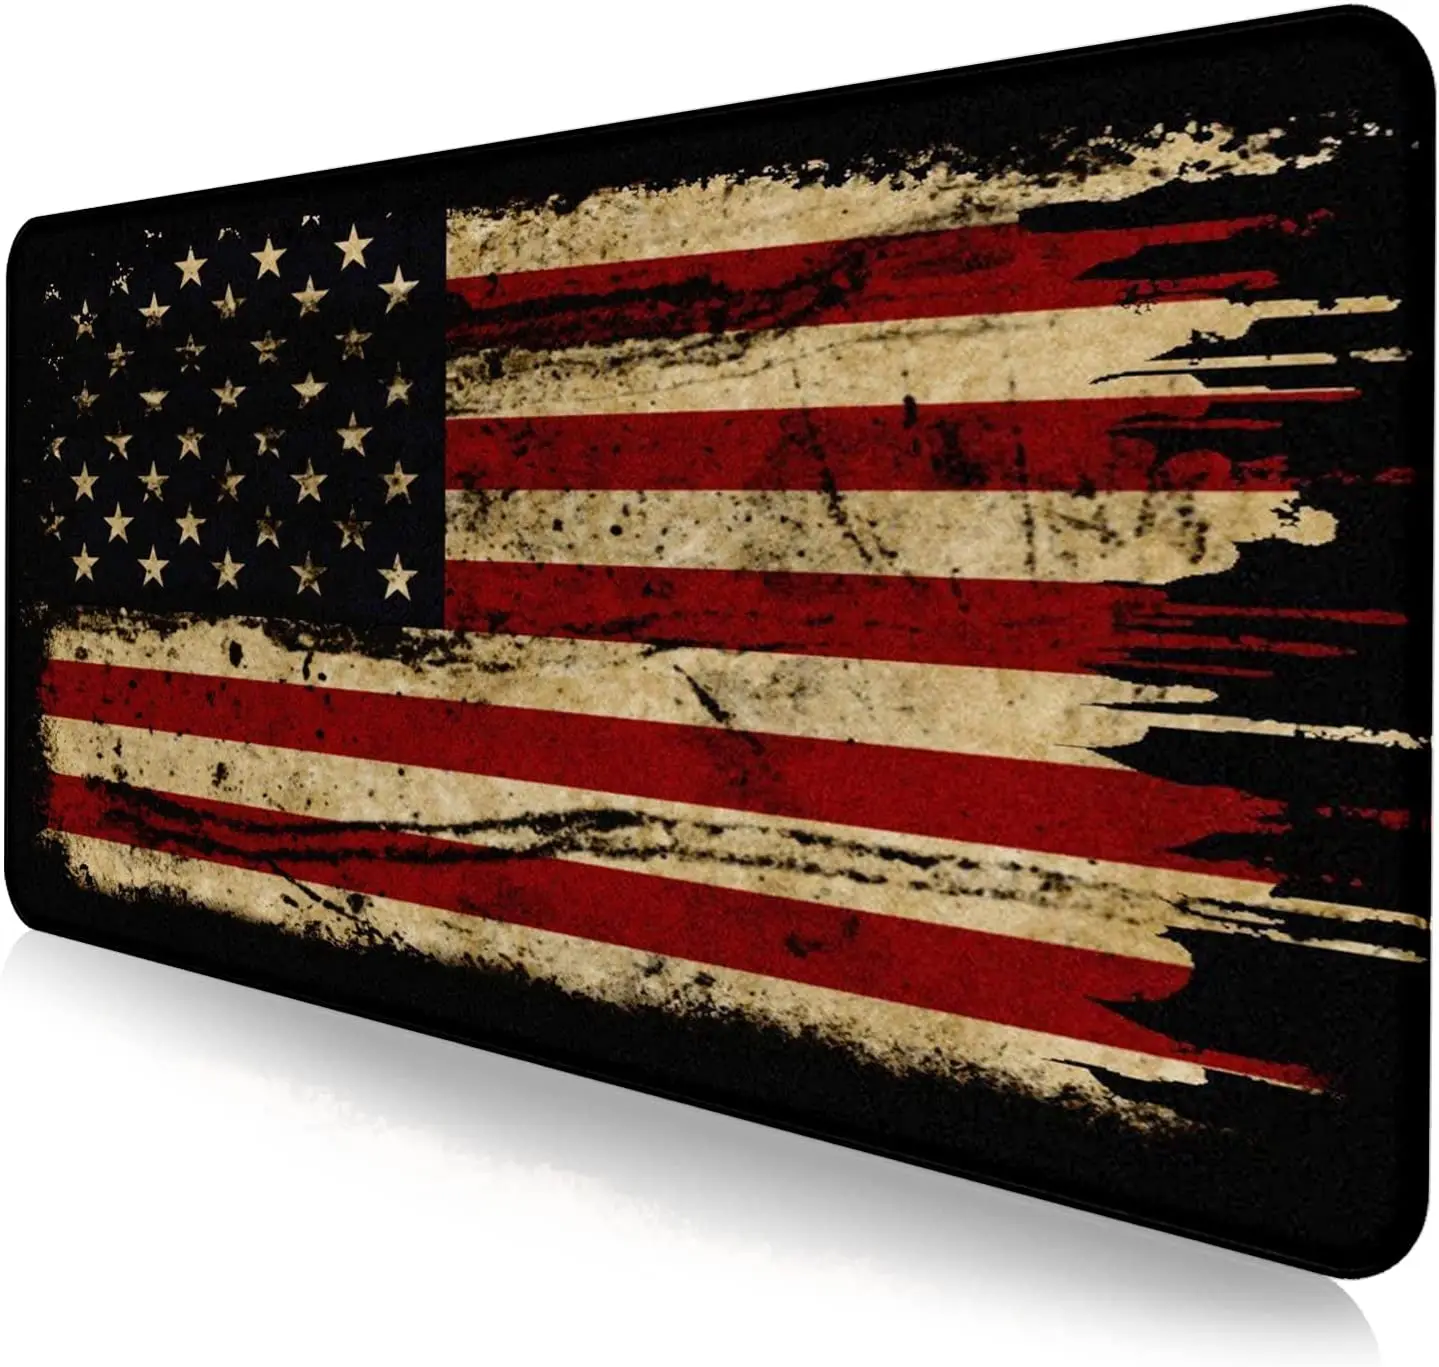 American Antique Flag Large Extended Gaming Mouse Pad Non-Slip Waterproof Rubber Base for Computer Laptop Desk Pad 35.4